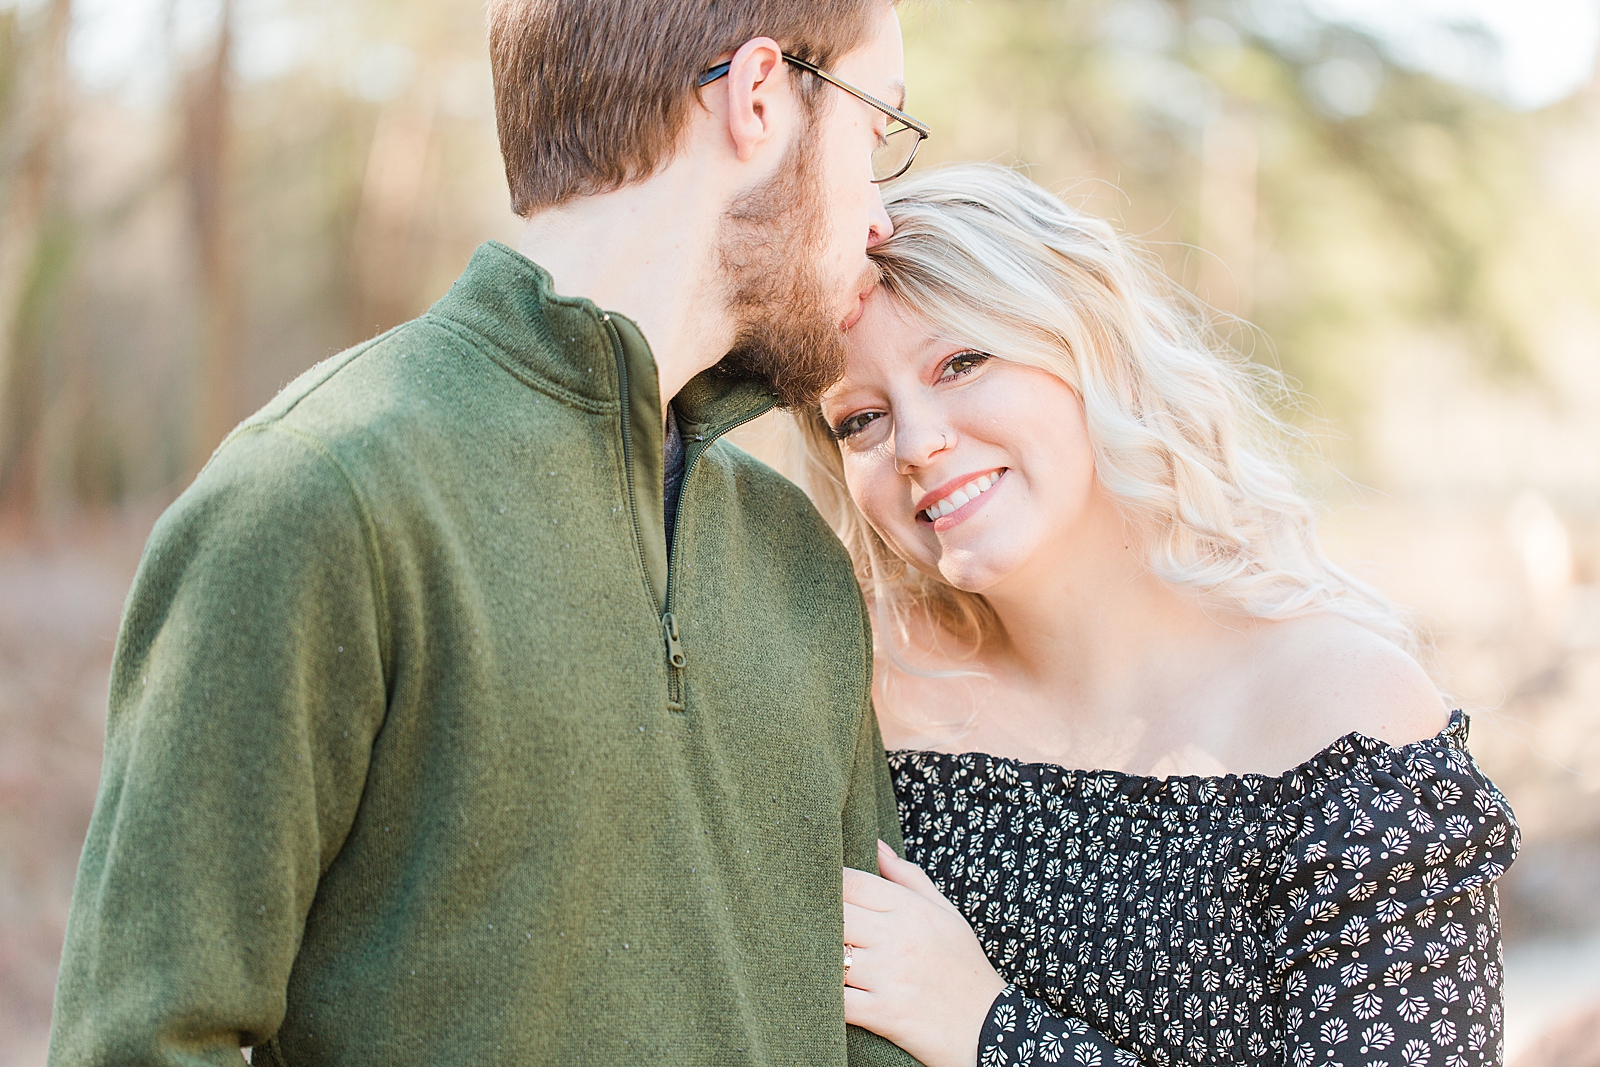 Ocoee River Engagement Session Cody kissing Haley on the head Photo